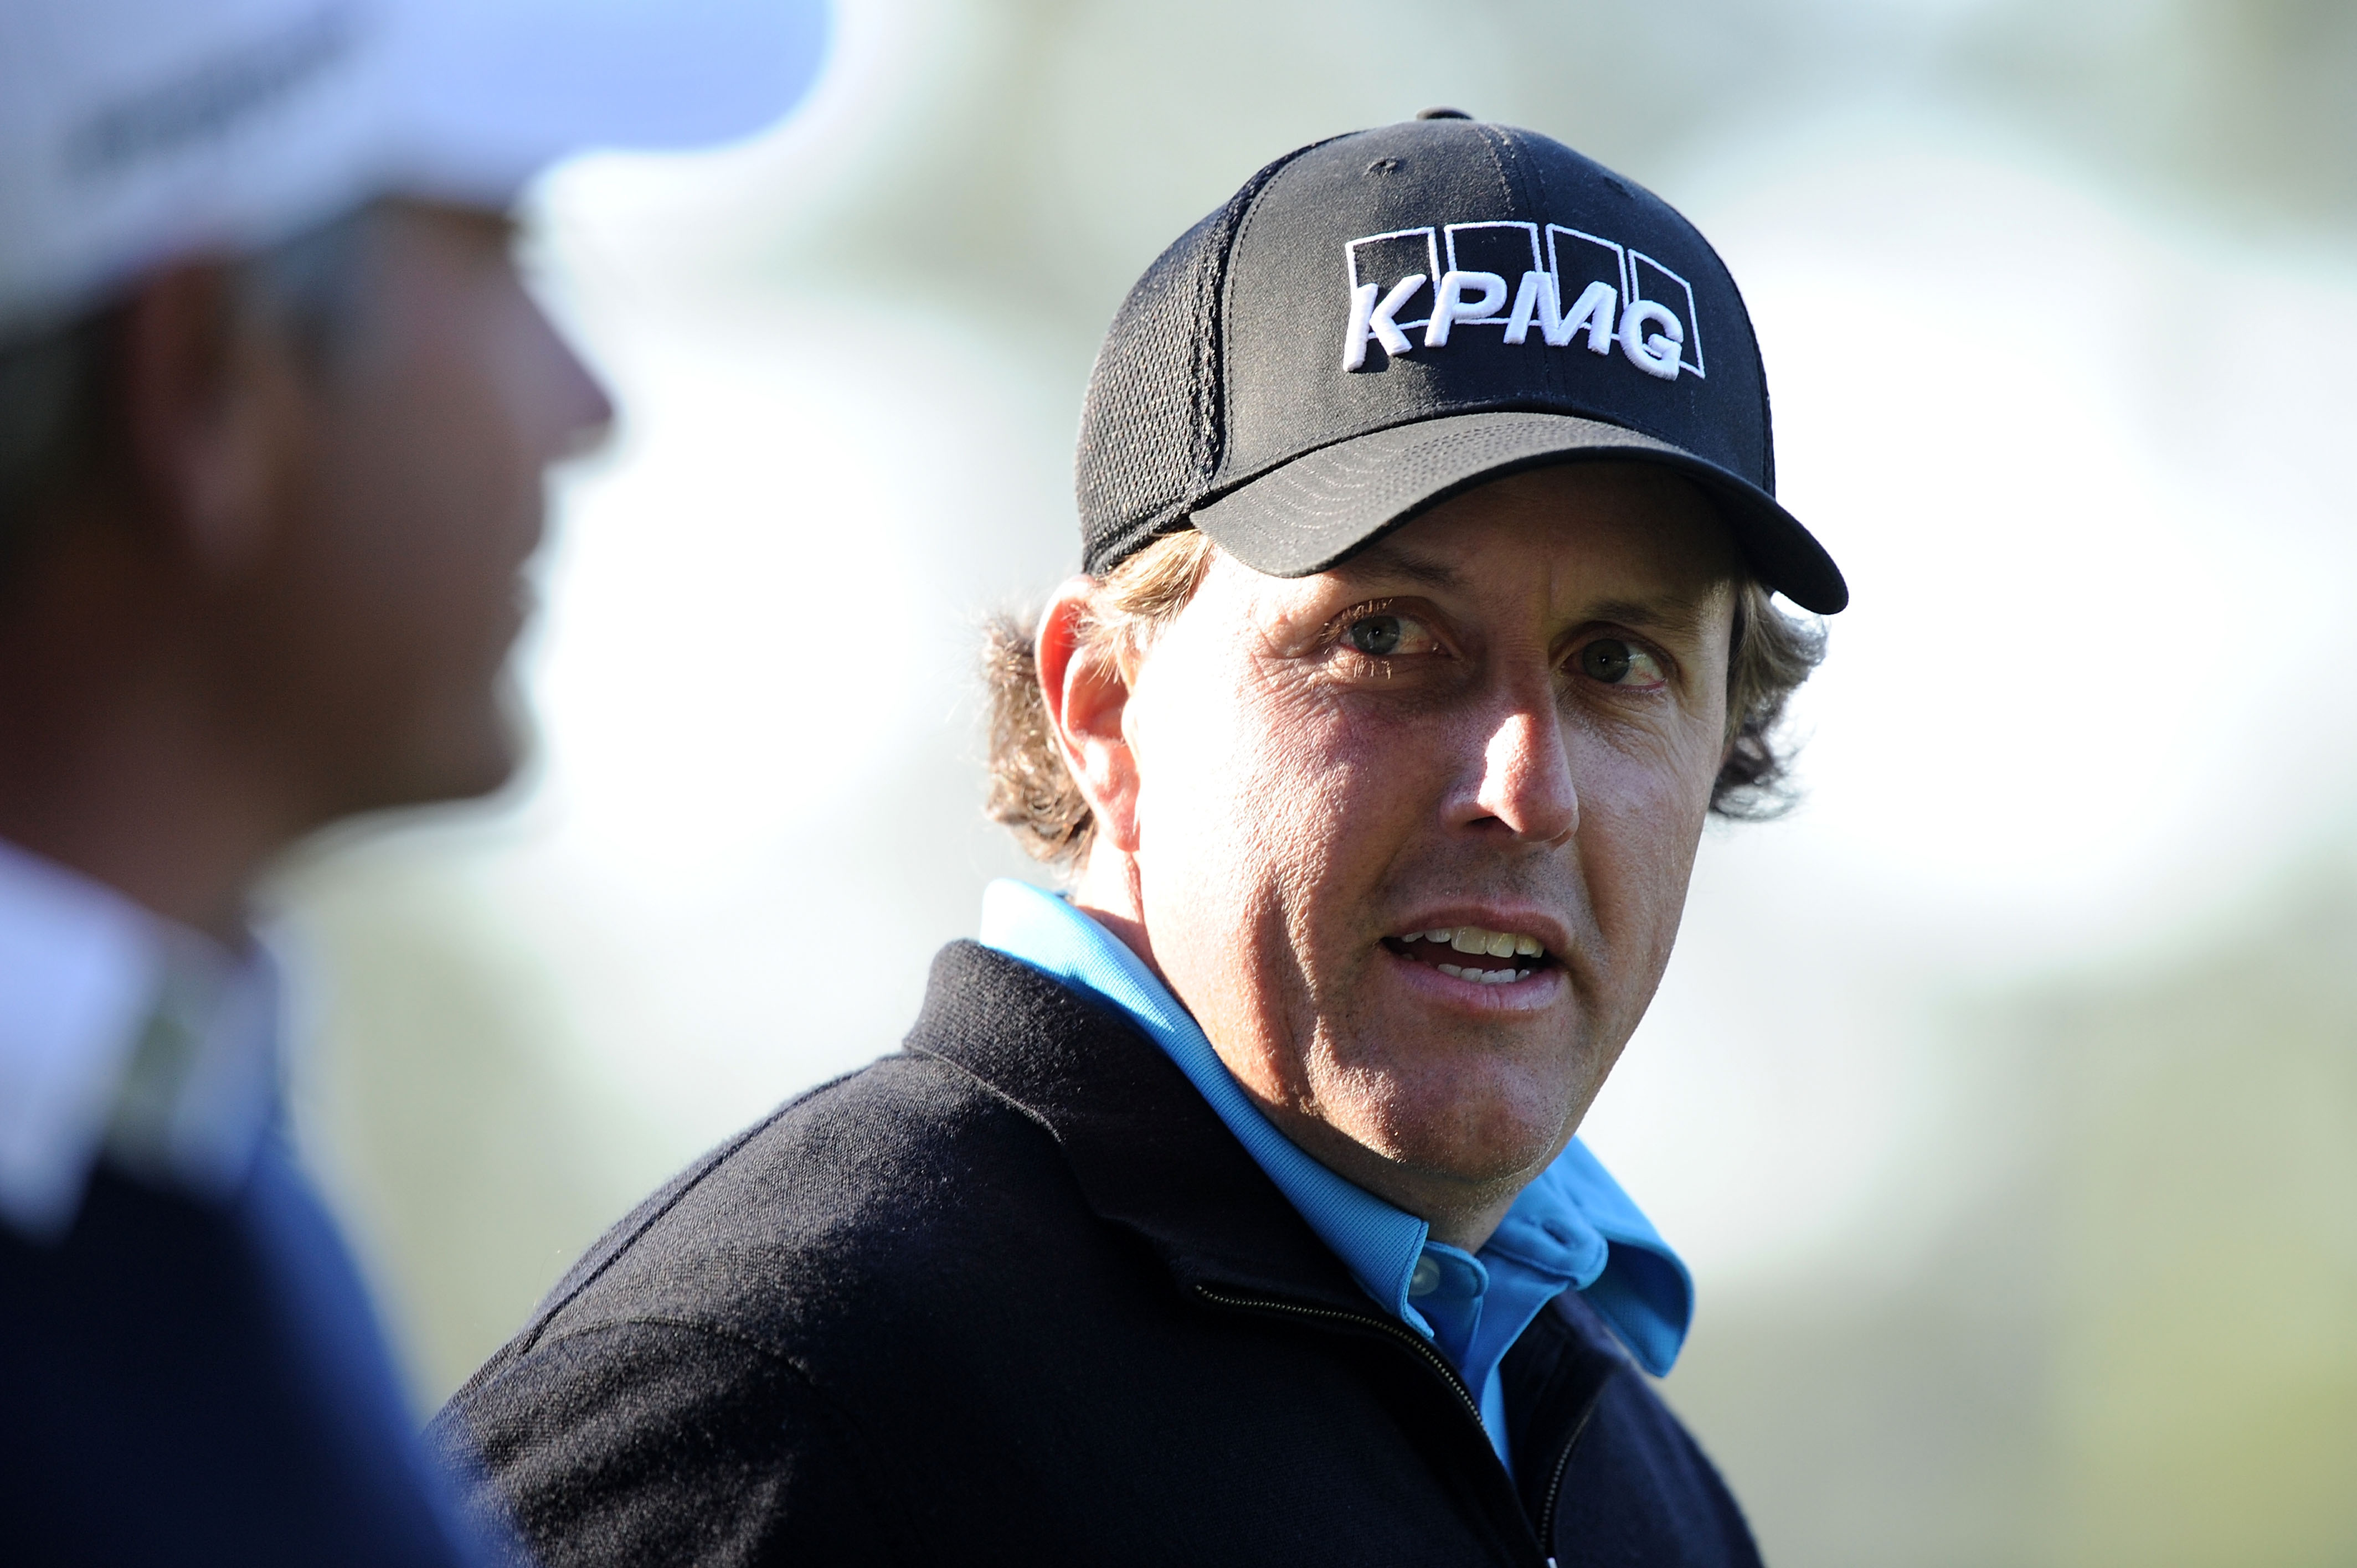 AUGUSTA, GA - APRIL 06:  Phil Mickelson looks on during a practice round prior to the 2011 Masters Tournament at Augusta National Golf Club on April 6, 2011 in Augusta, Georgia.  (Photo by Harry How/Getty Images)